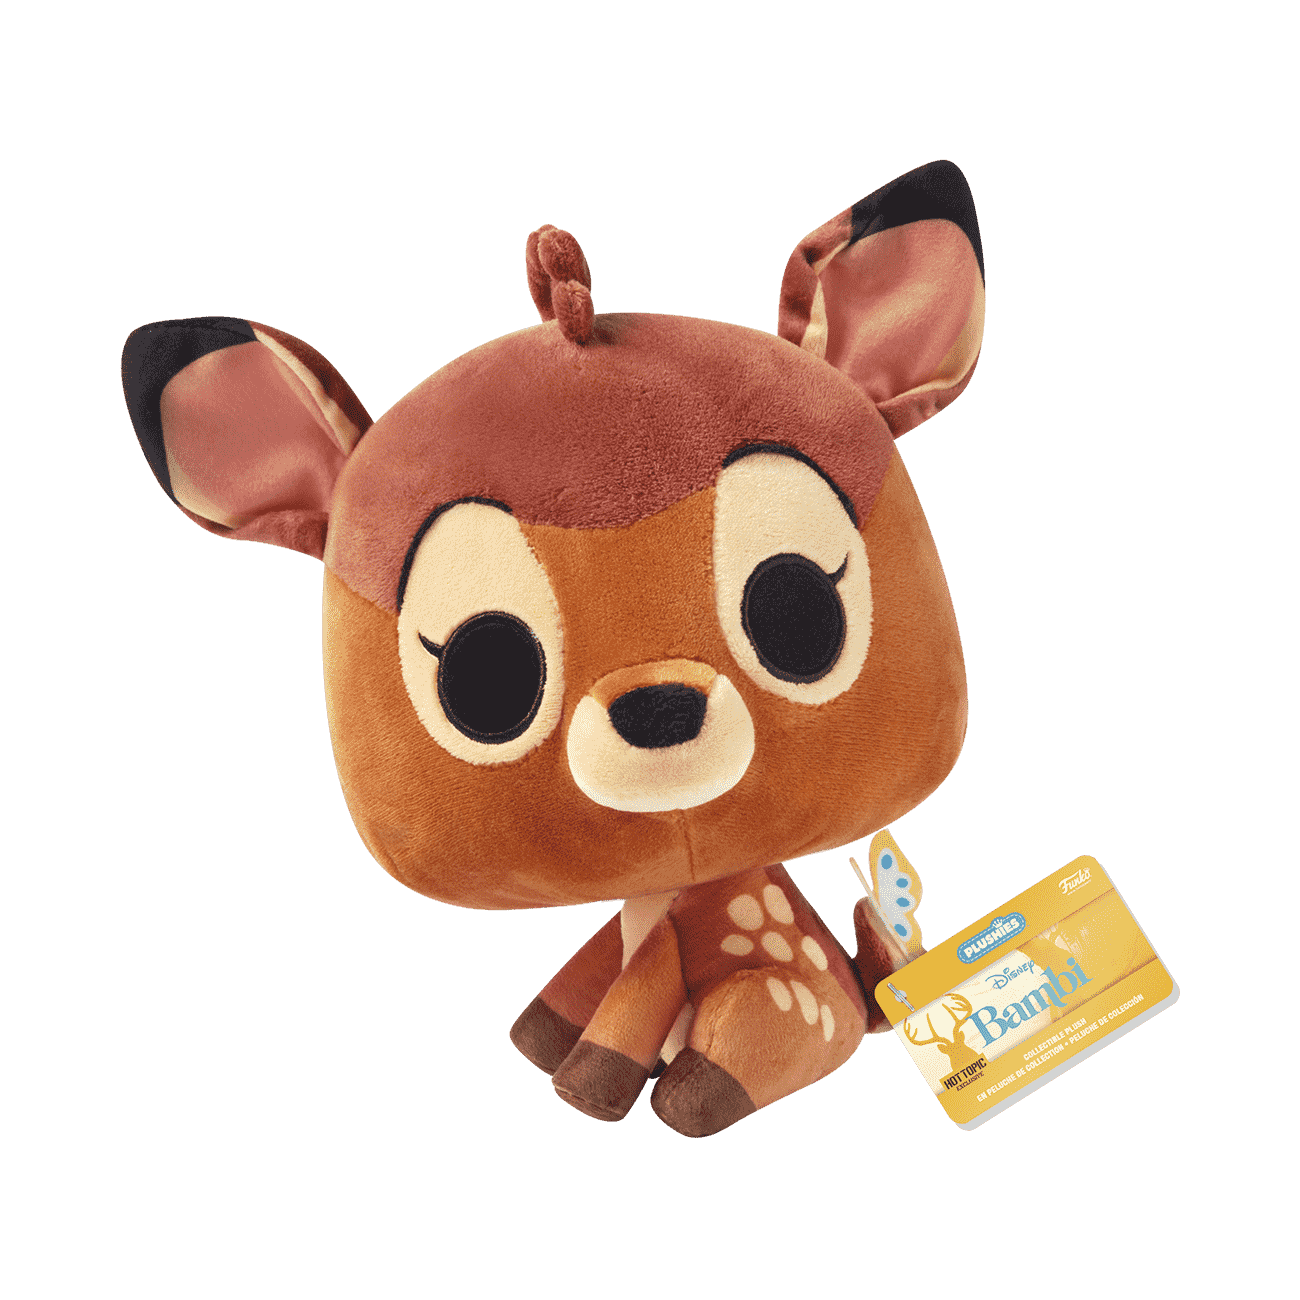 Buy Bambi with Flowers Plush at Funko.